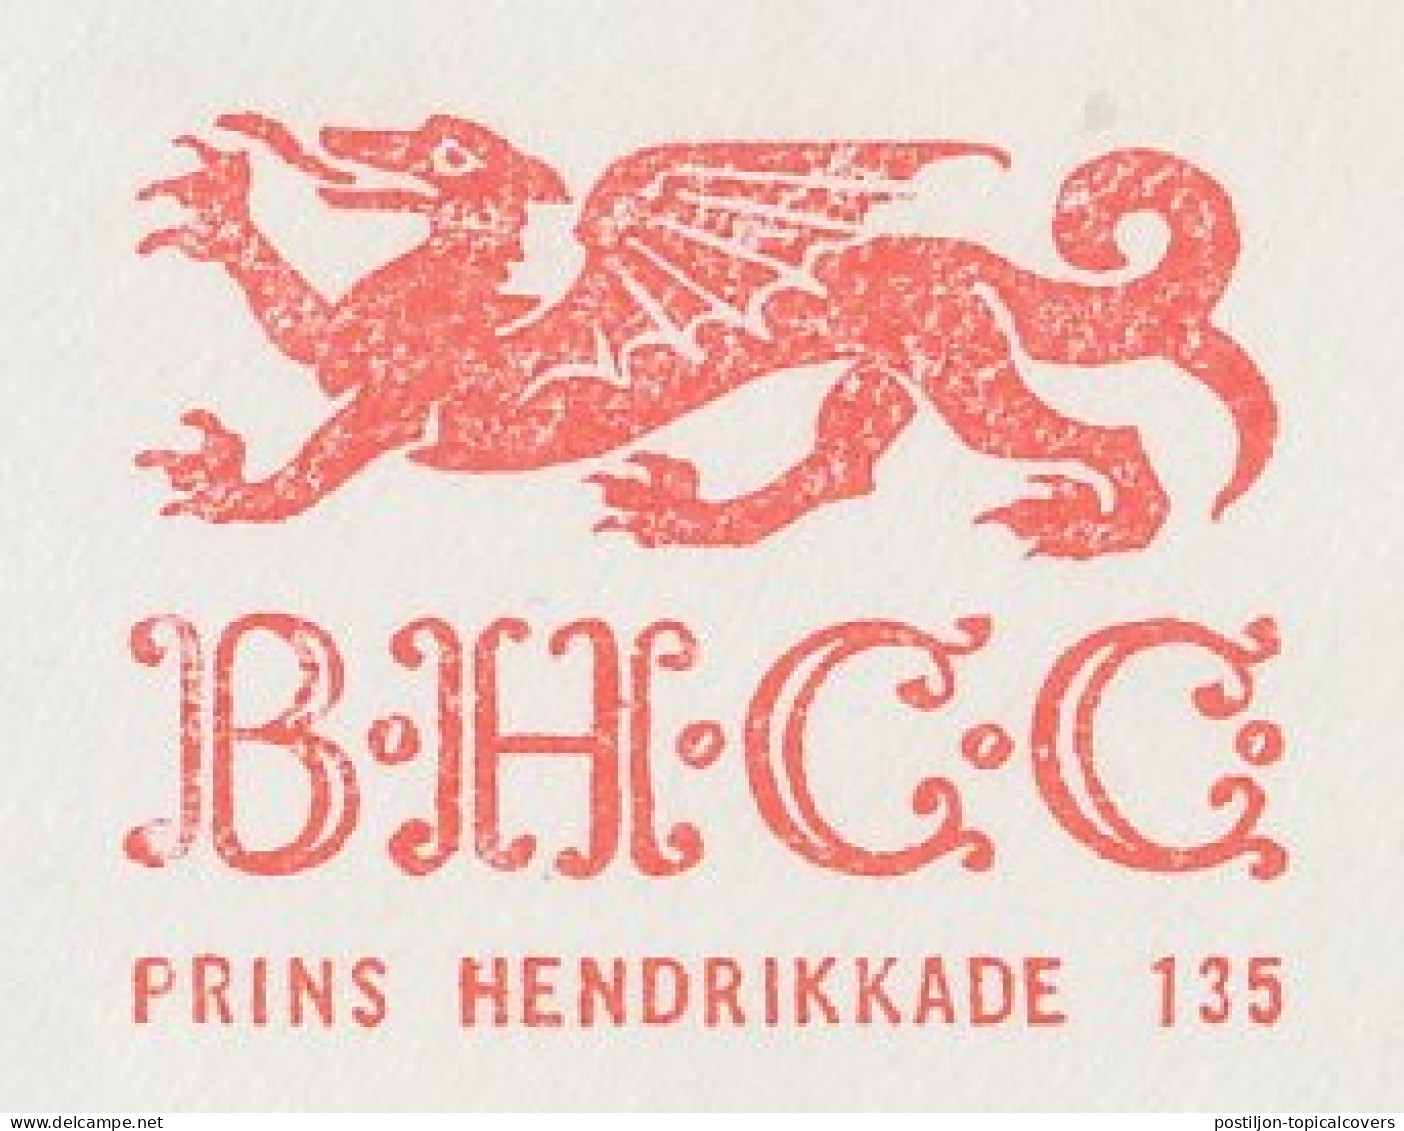 Meter Cover Netherlands 1970 Dragon - British Holland Coal Company - Climate & Meteorology